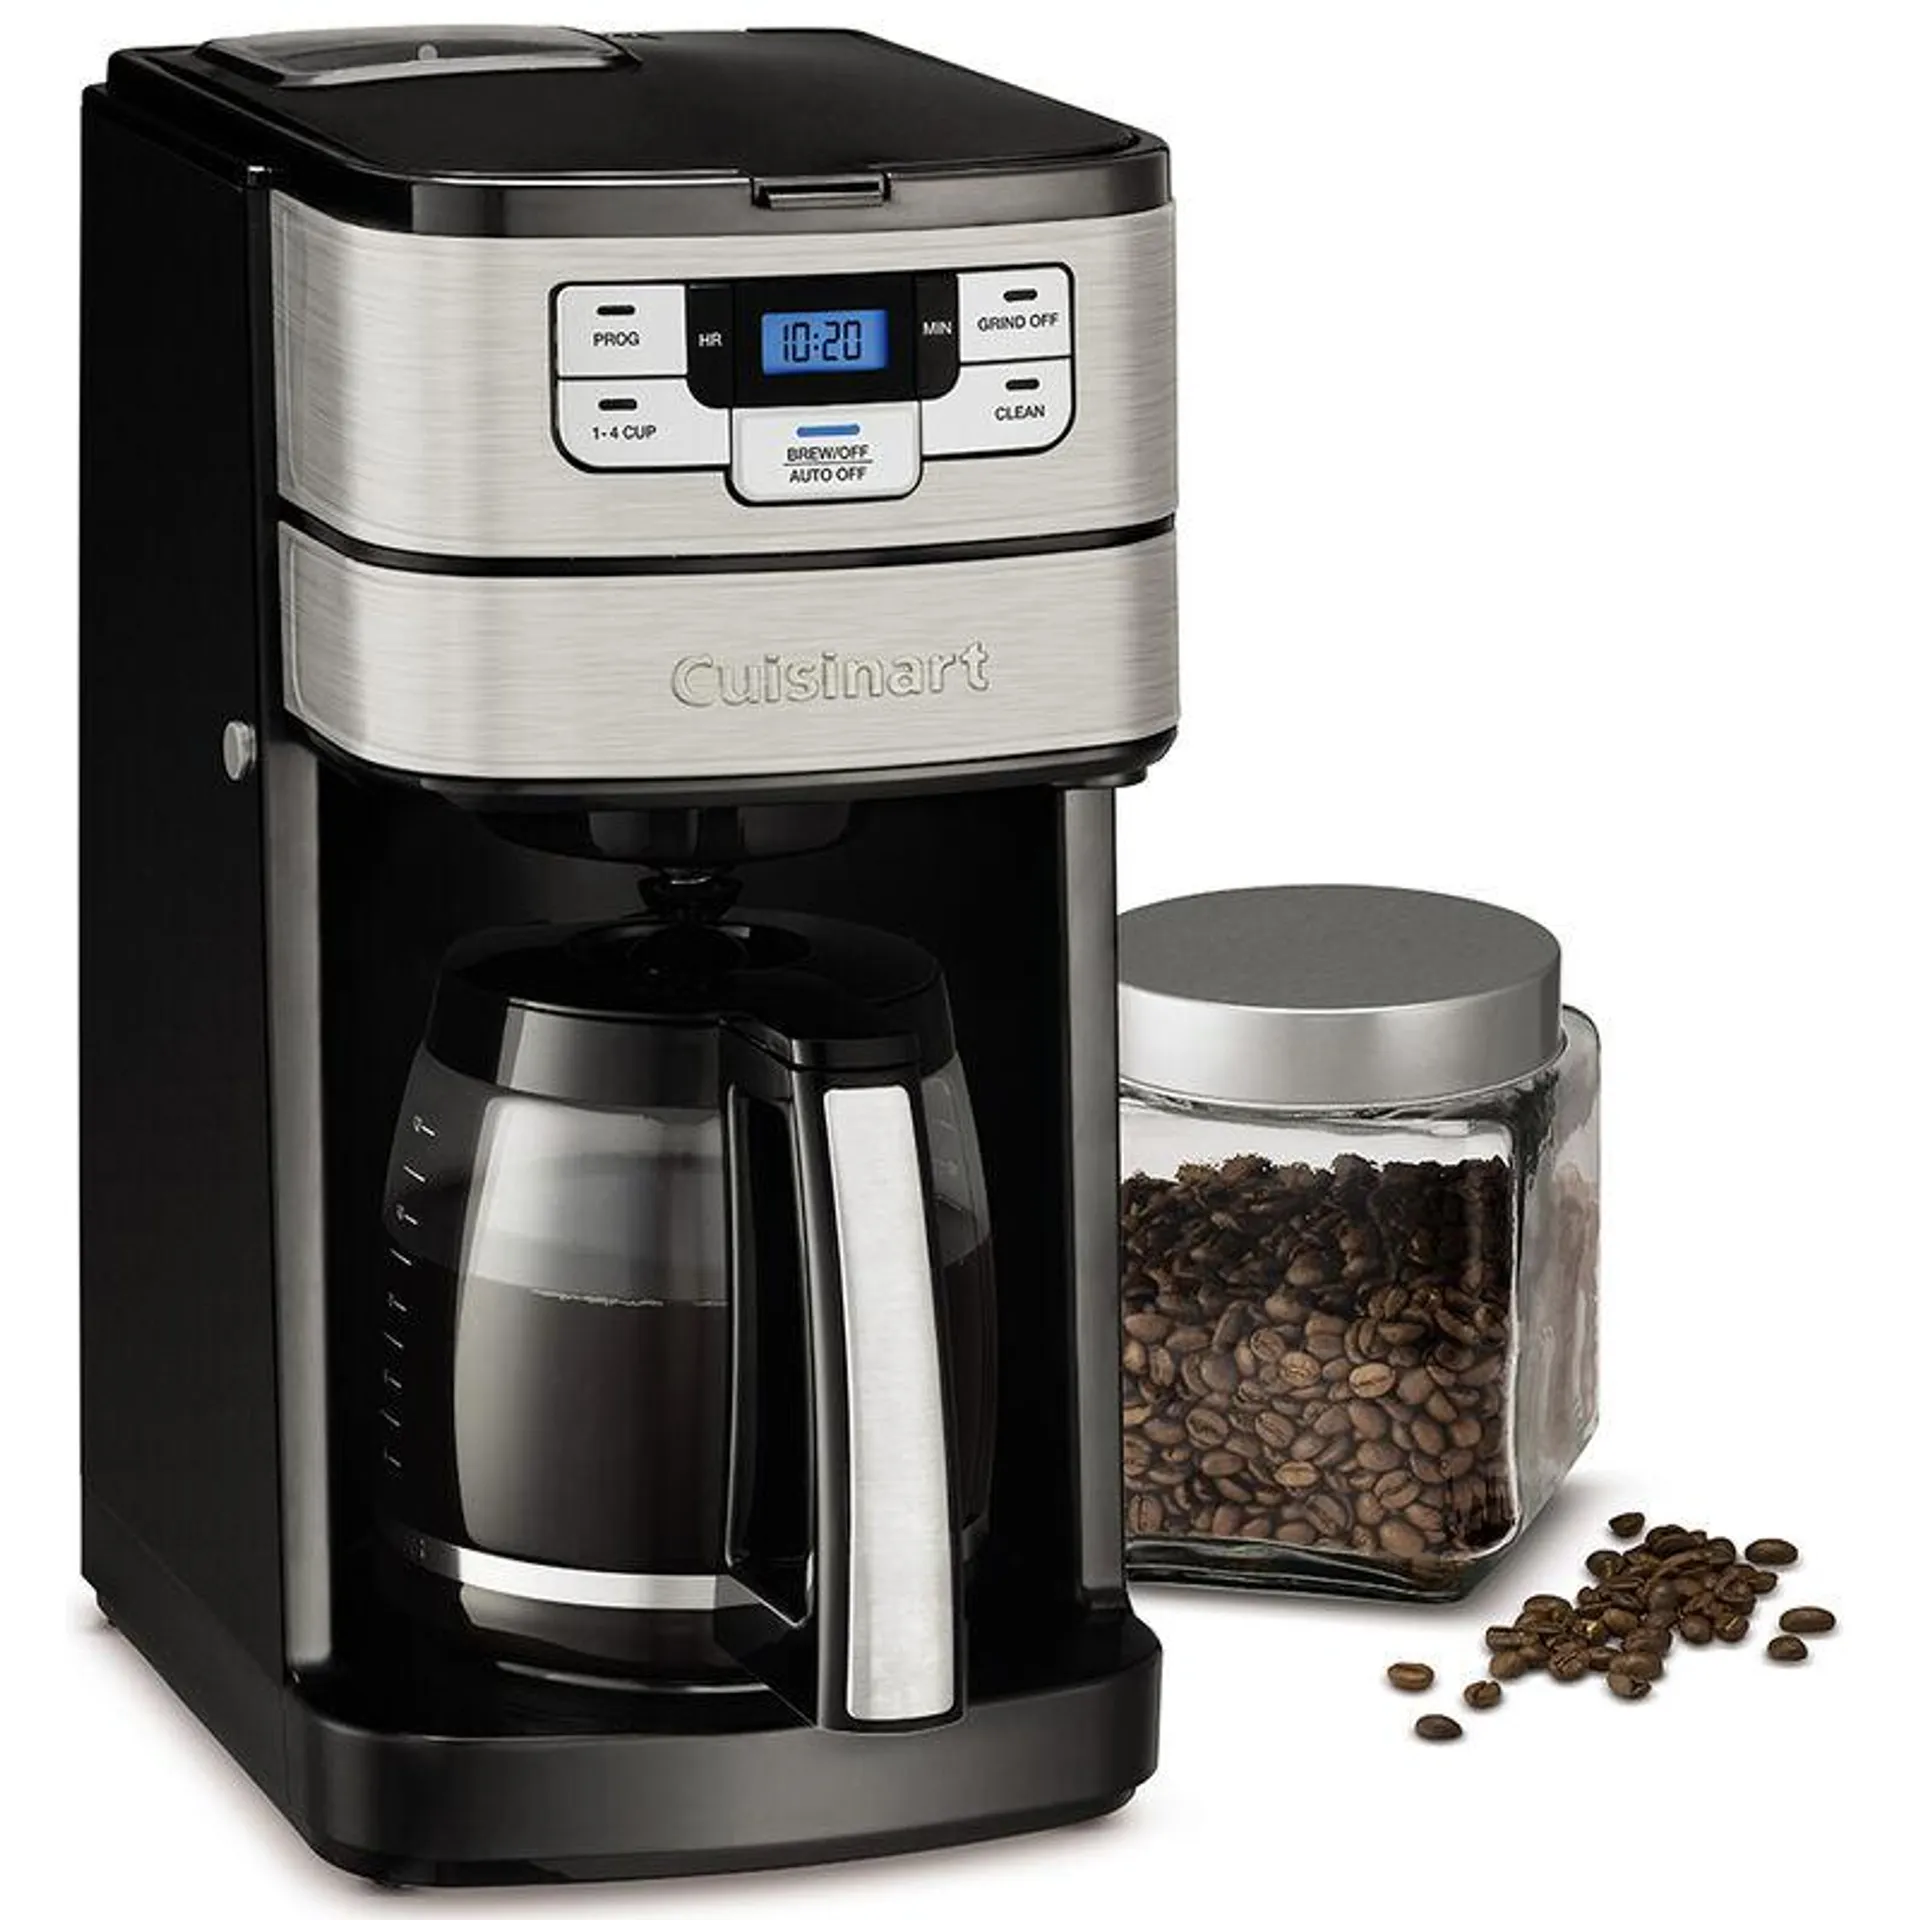 Cuisinart Automatic Grind & Brew 12-Cup Coffeemaker - Silver